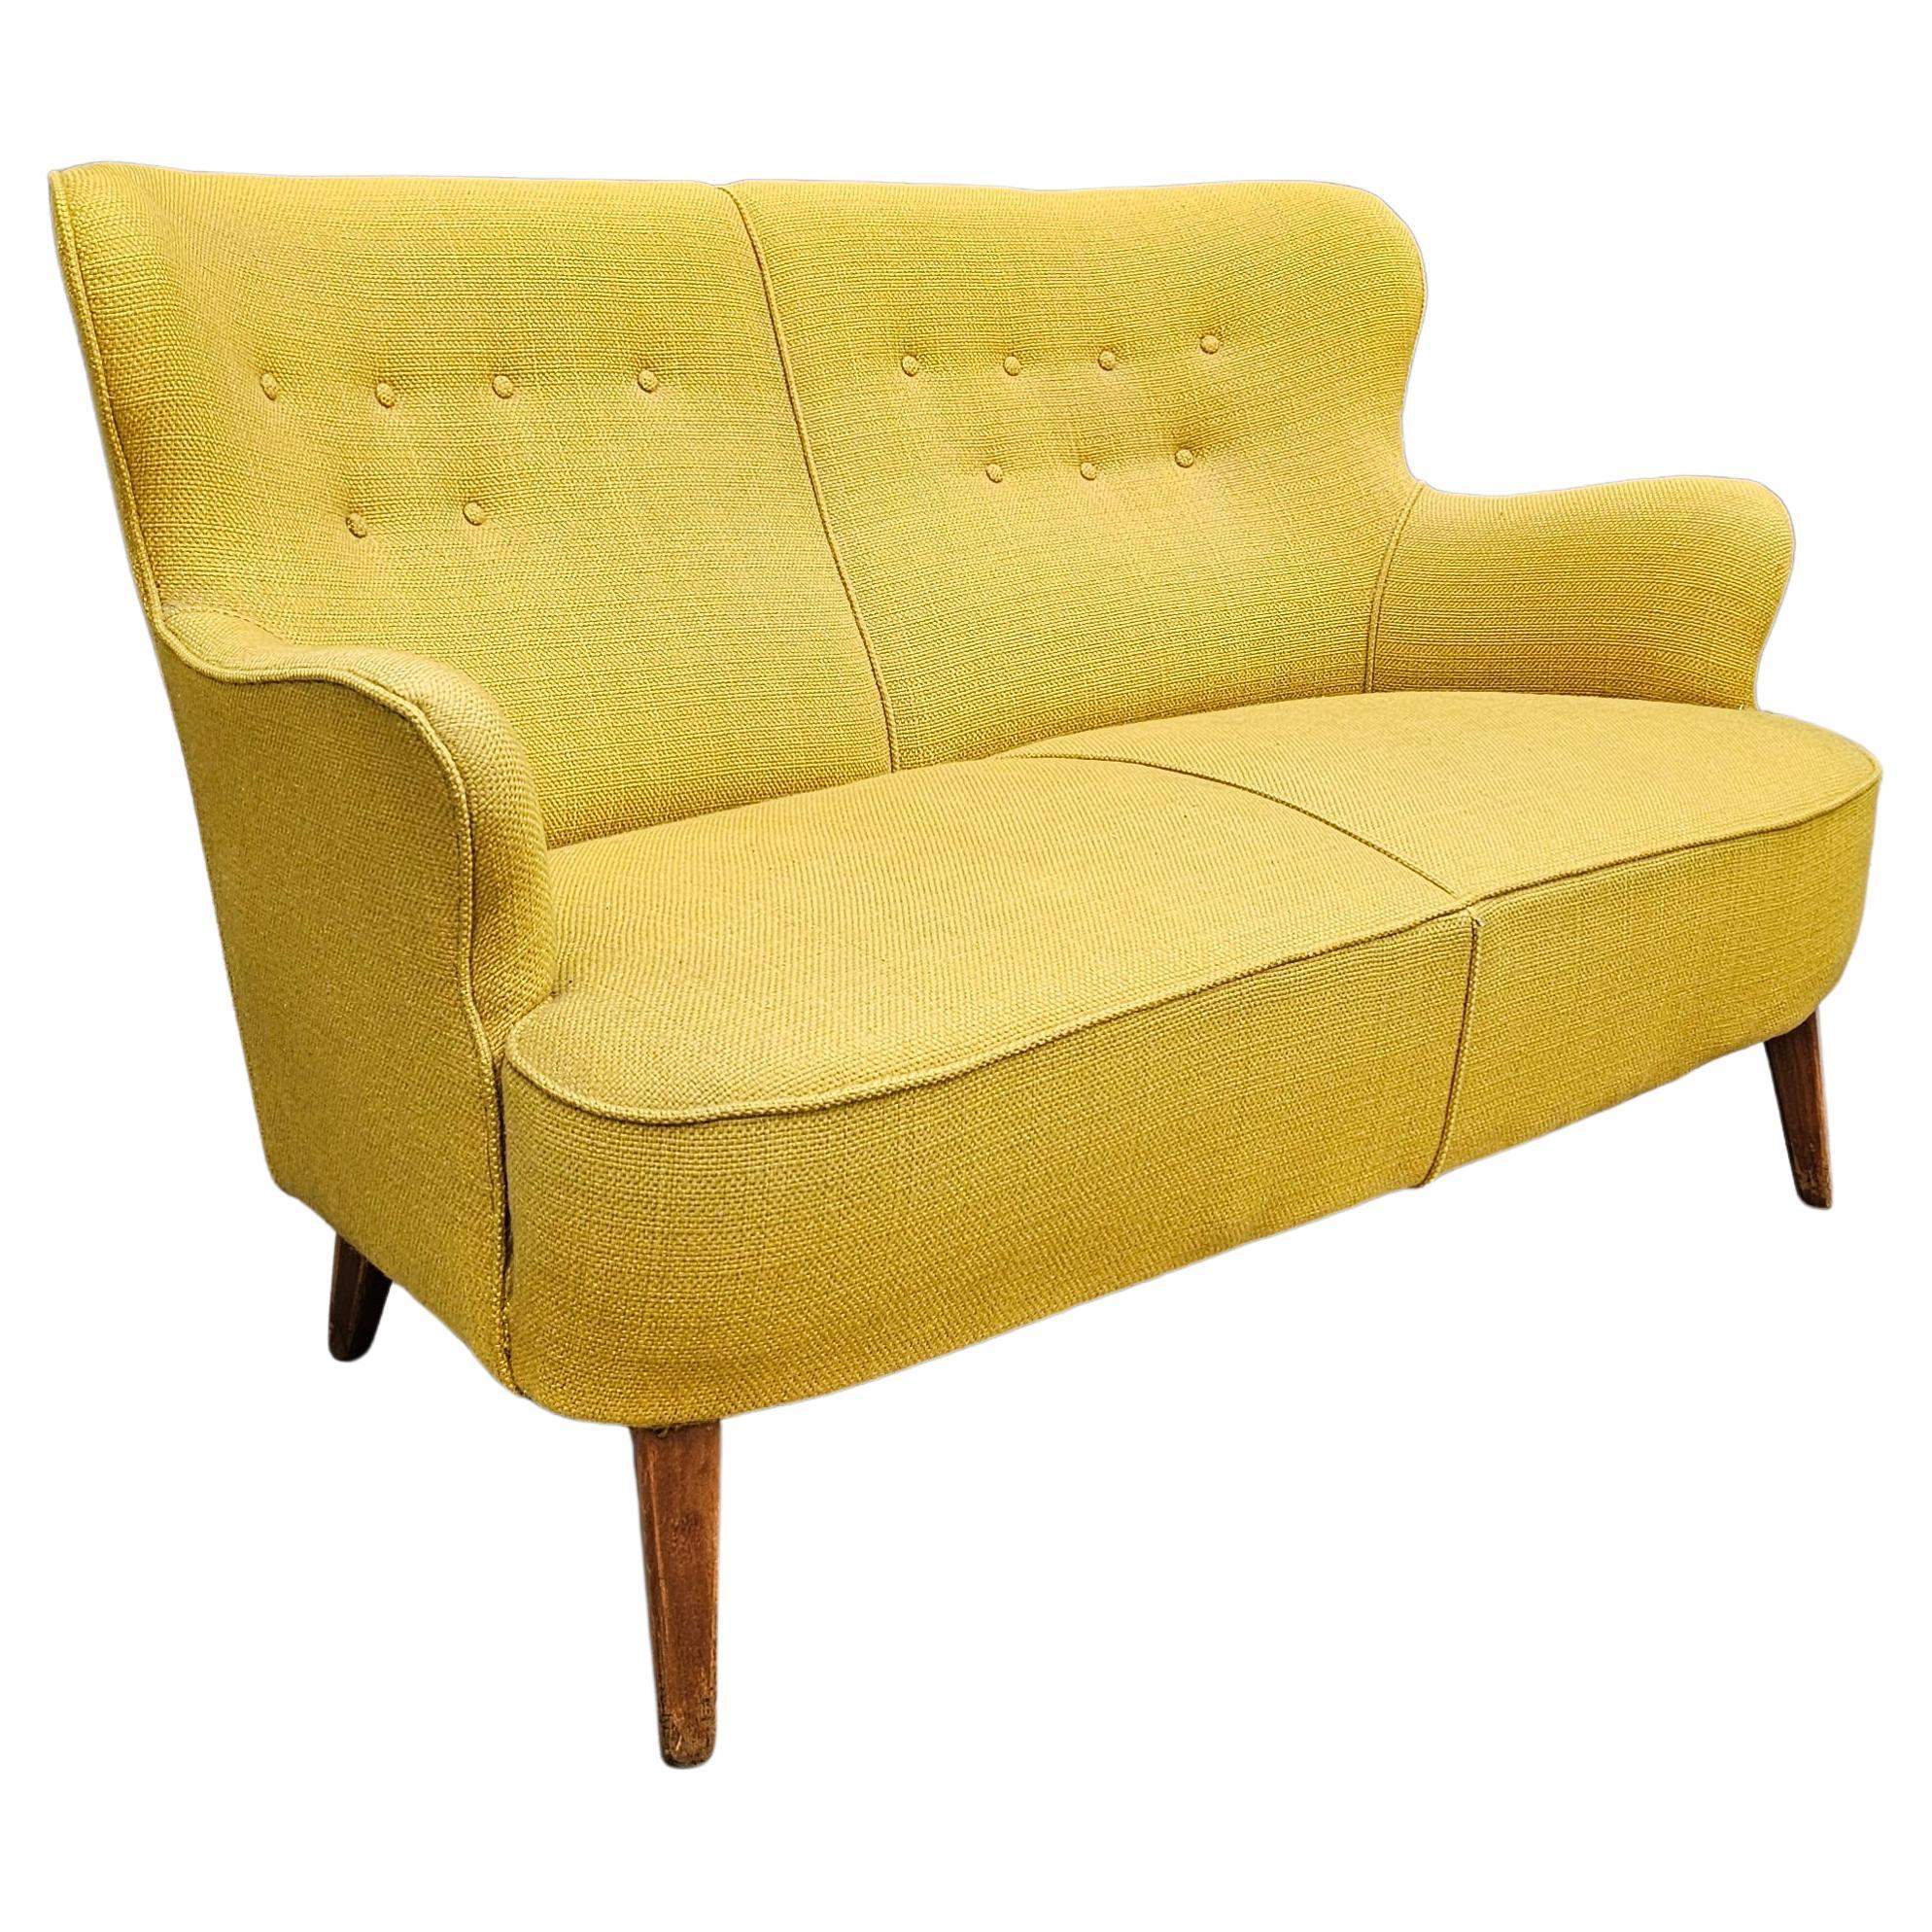 Theo Ruth for Artifort, Original Classic 2 Seater 